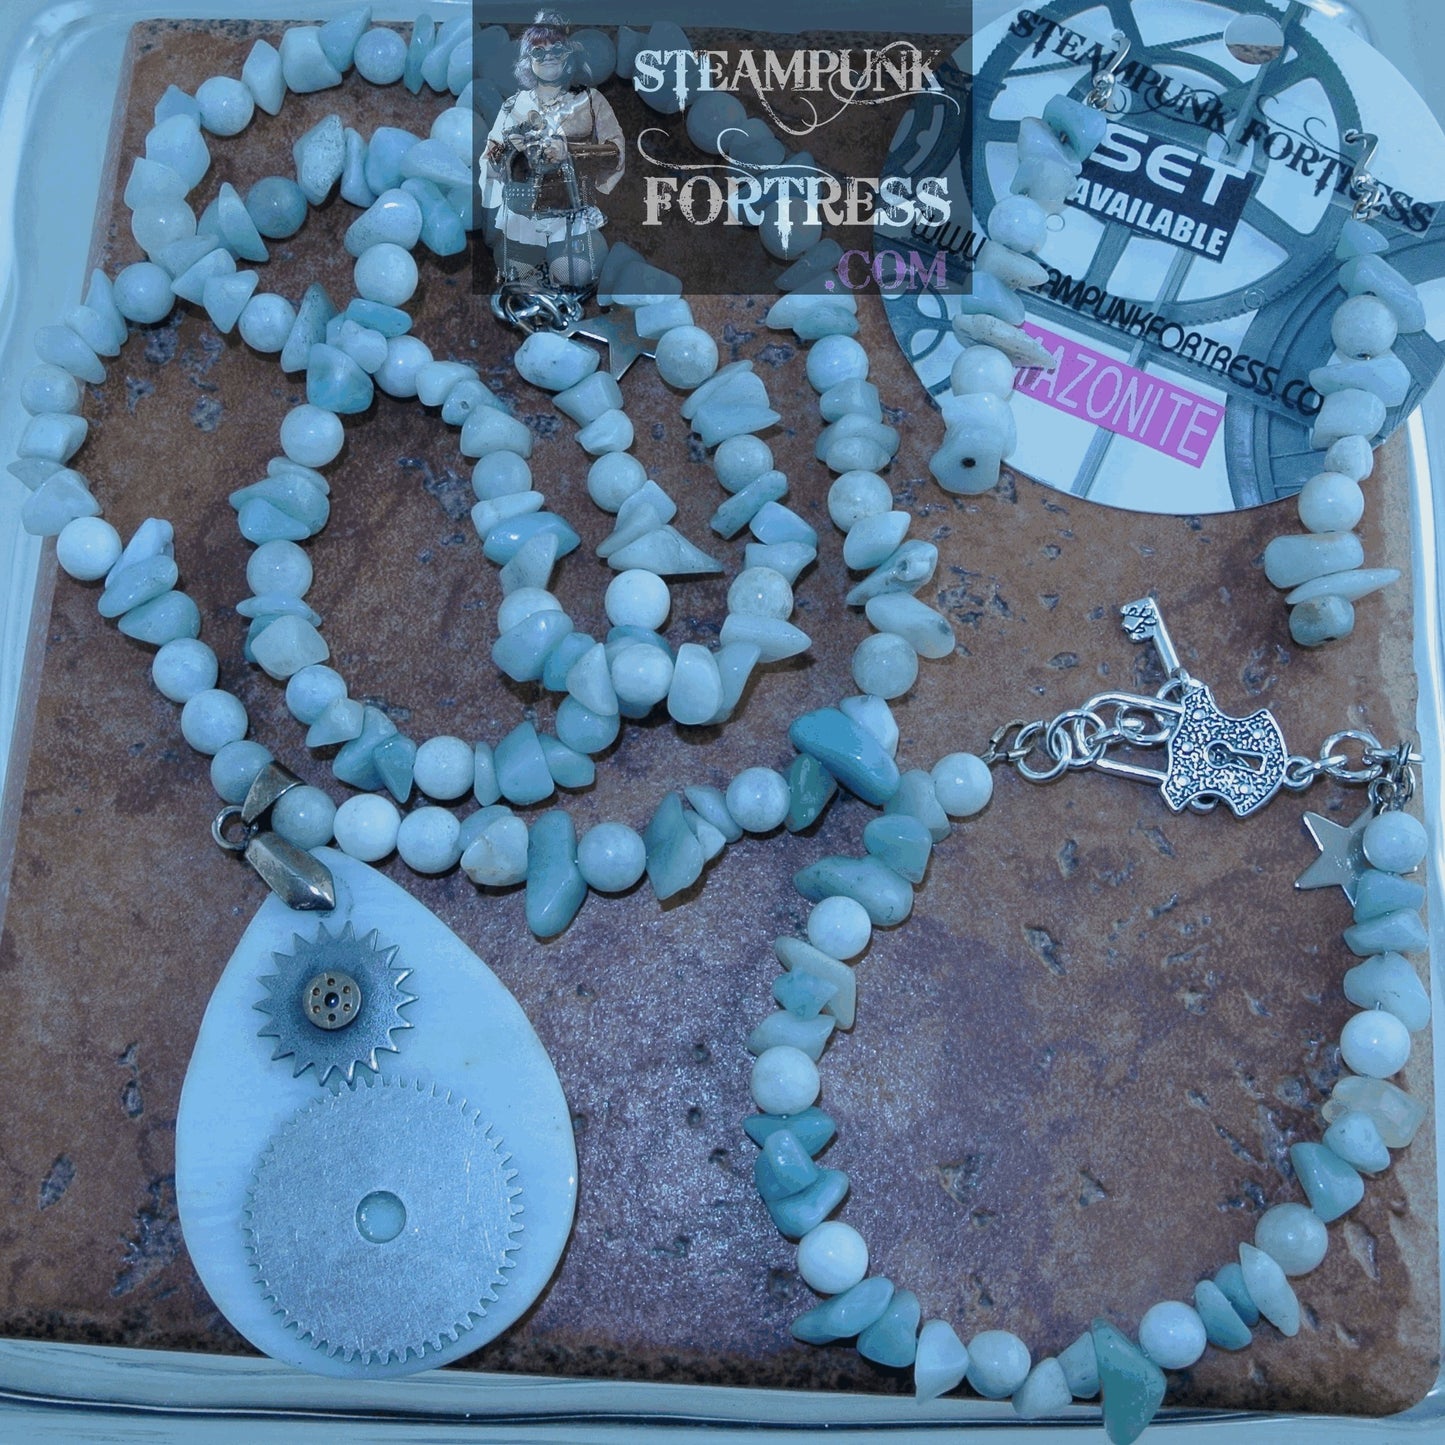 SILVER AMAZONITE GEMSTONES STONES TEARDROP FOCAL 2 SILVER GEARS BB8 ROUNDS CHIPS NECKLACE SET AVAILABLE 2 SIDED REVERSIBLE STARR WILDE STEAMPUNK FORTRESS